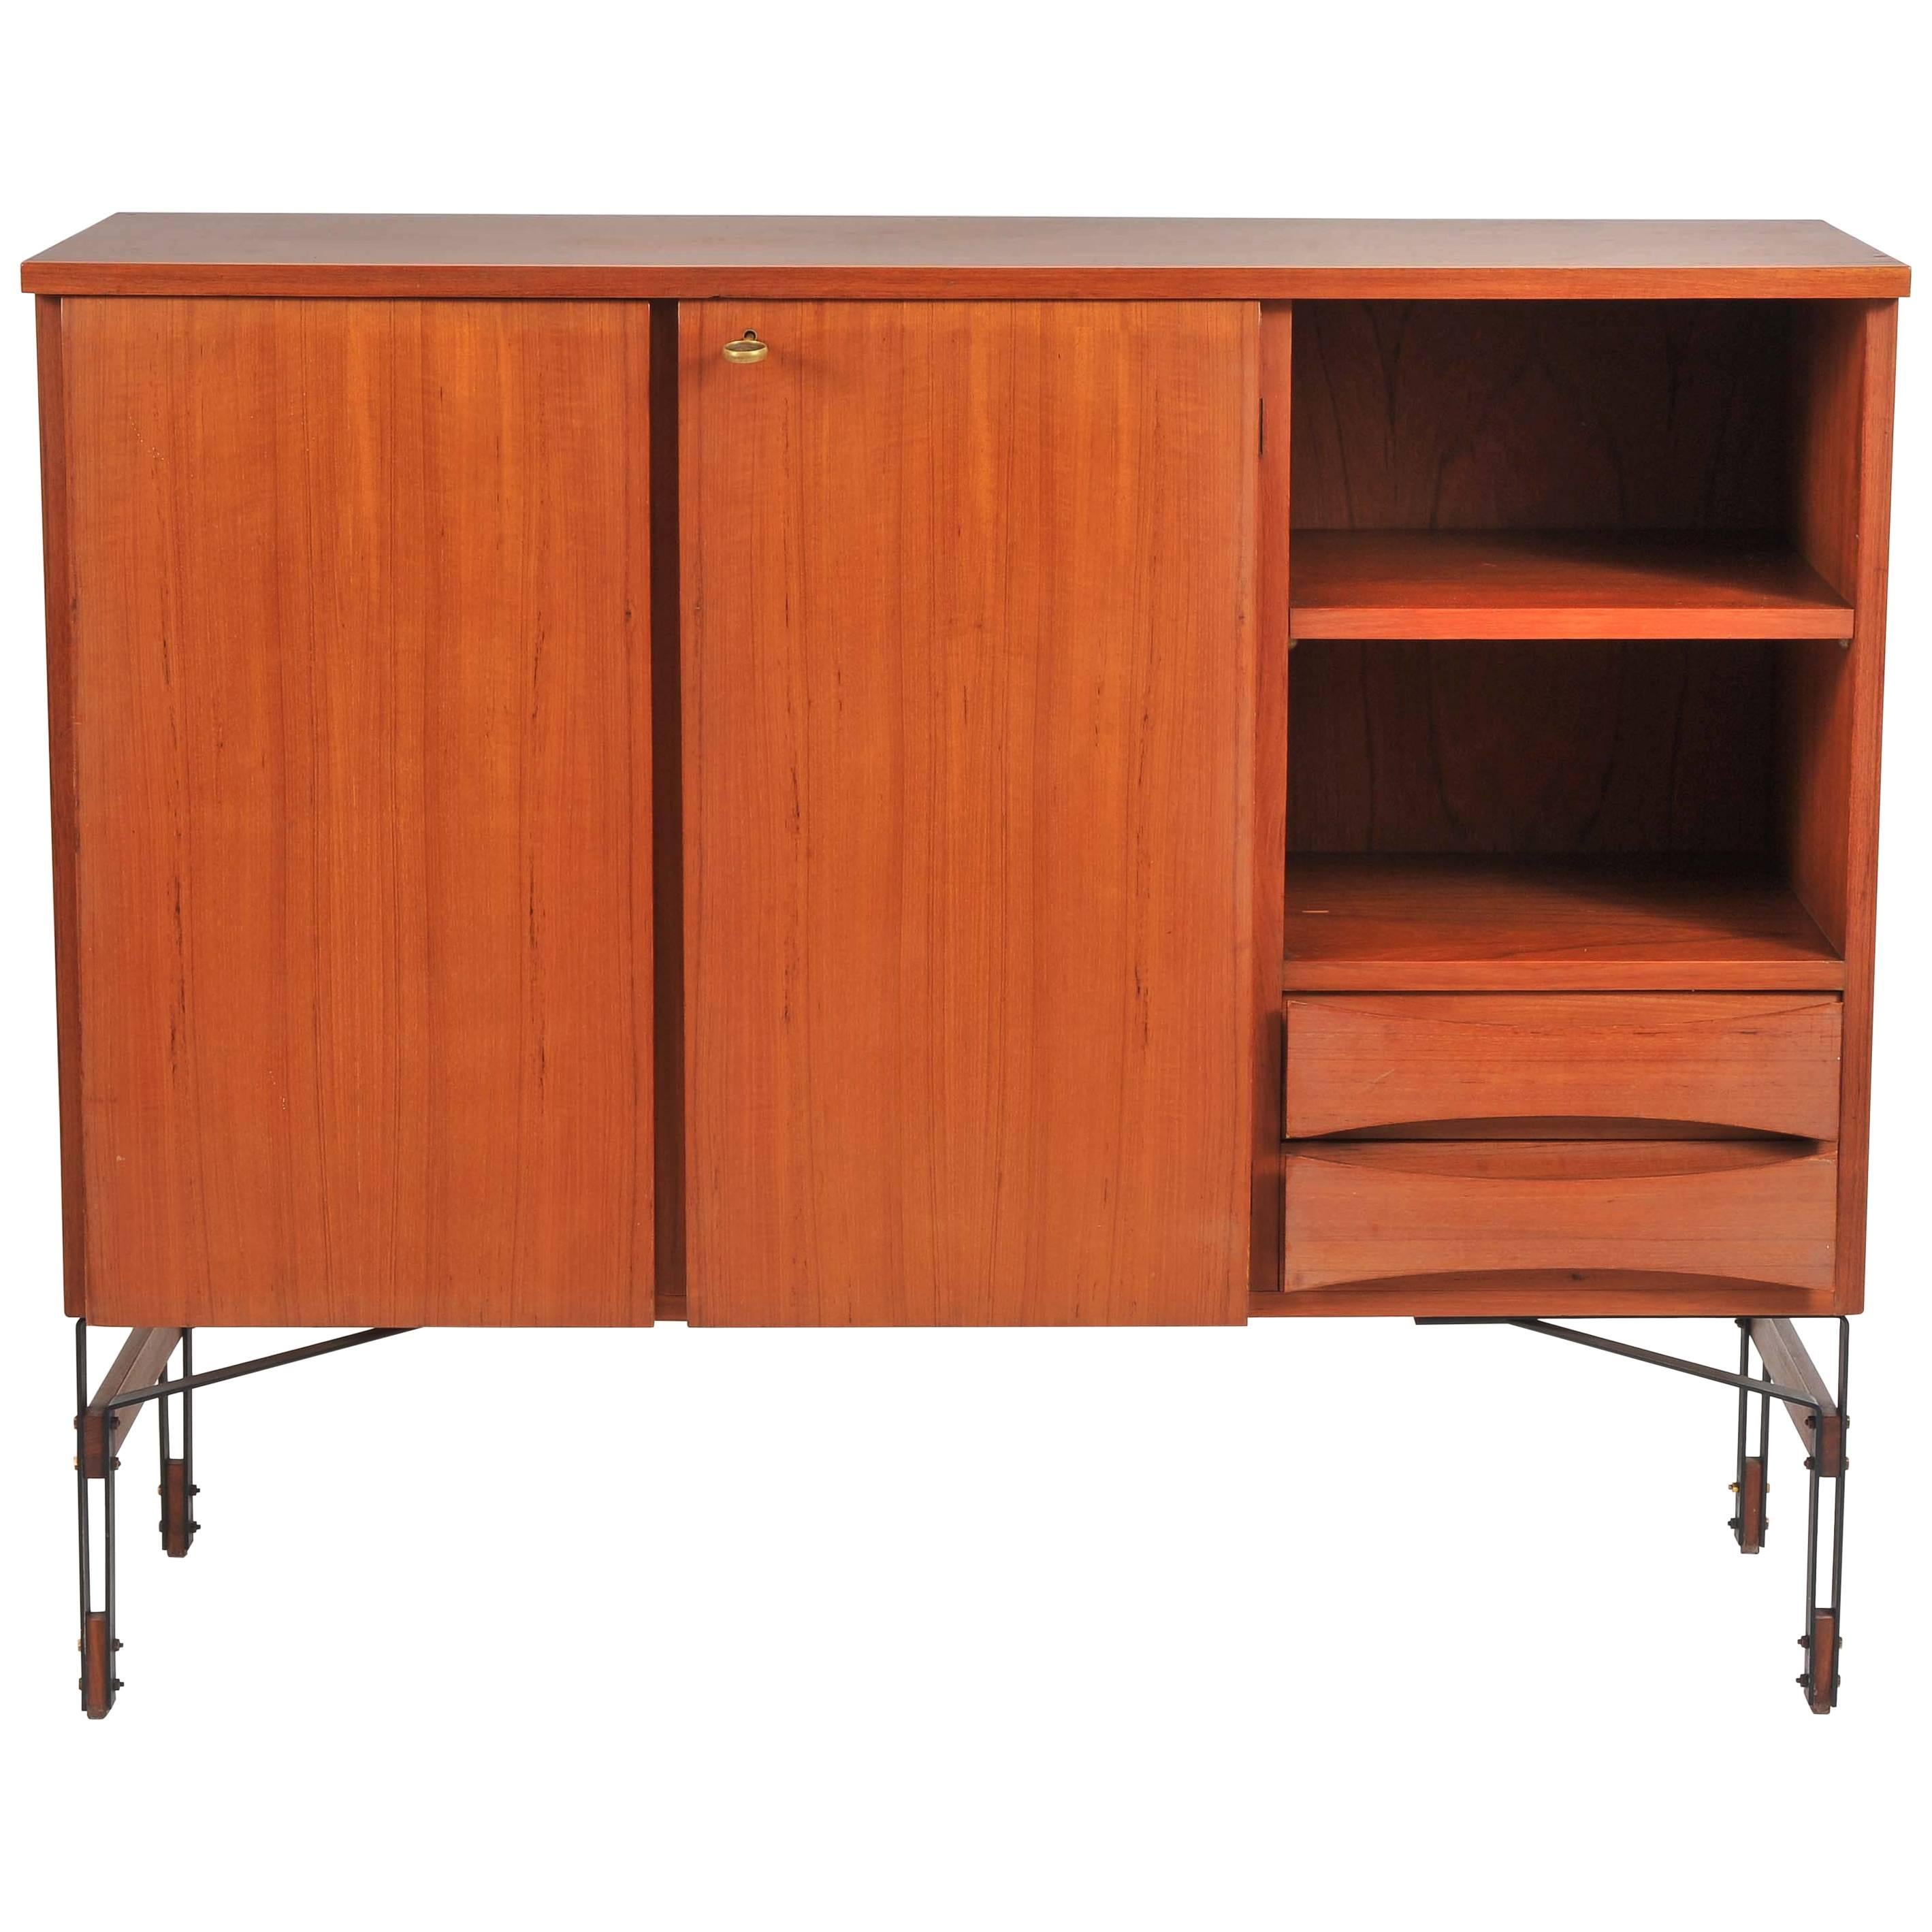 Sideboard in Cherry Wood